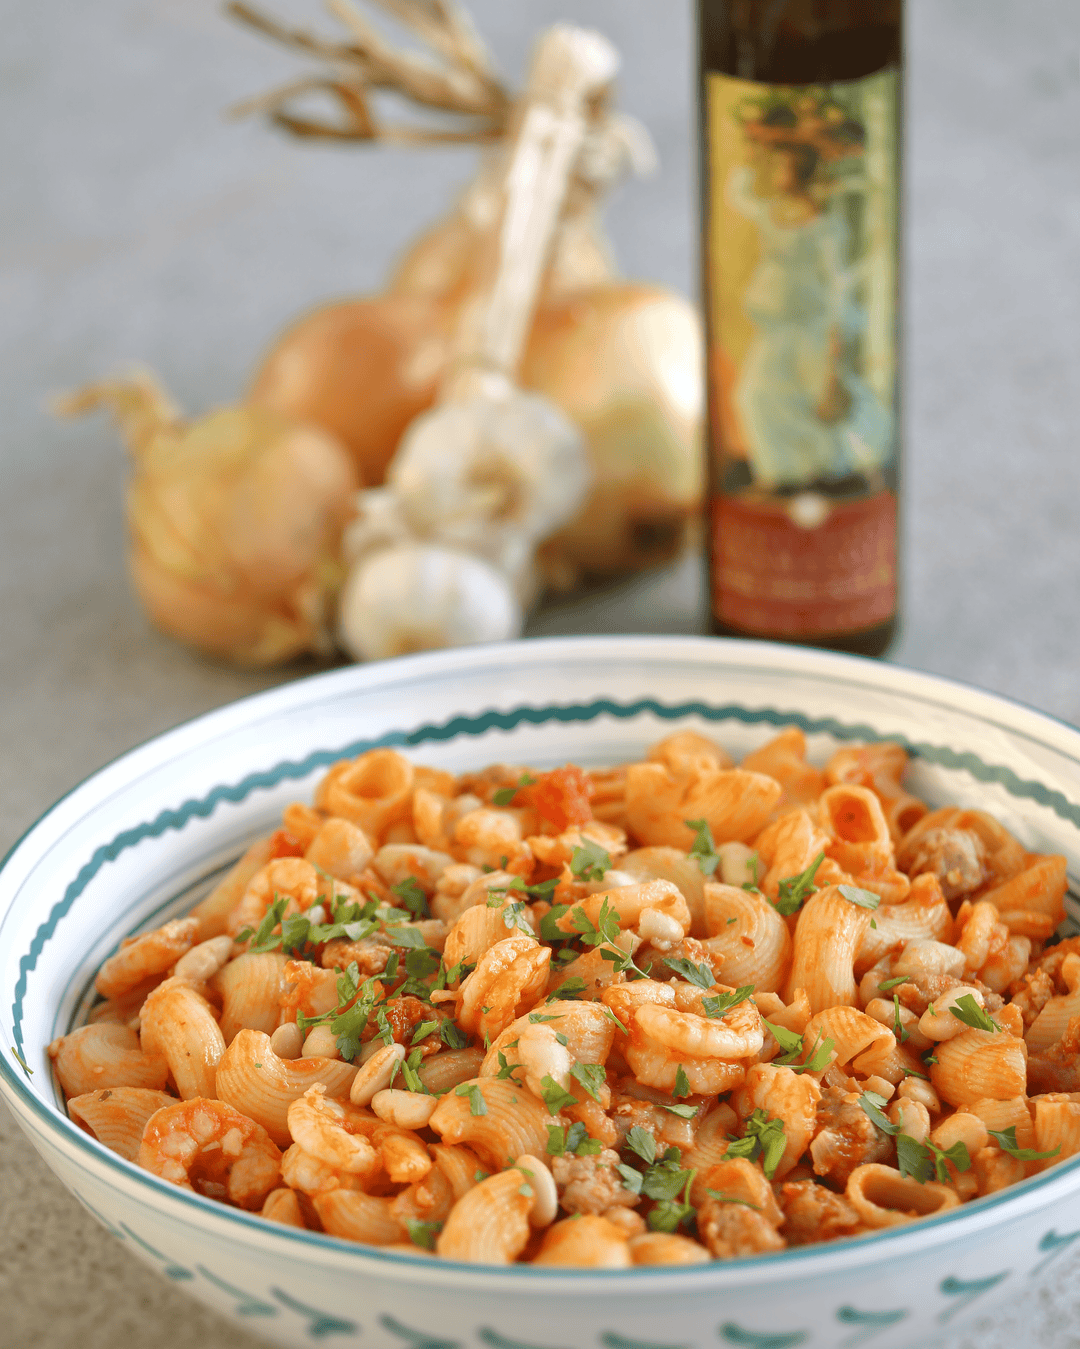 Cavatappi with Shrimp, Spicy Sausage, and White Beans Recipe - Bramasole Olive Oil